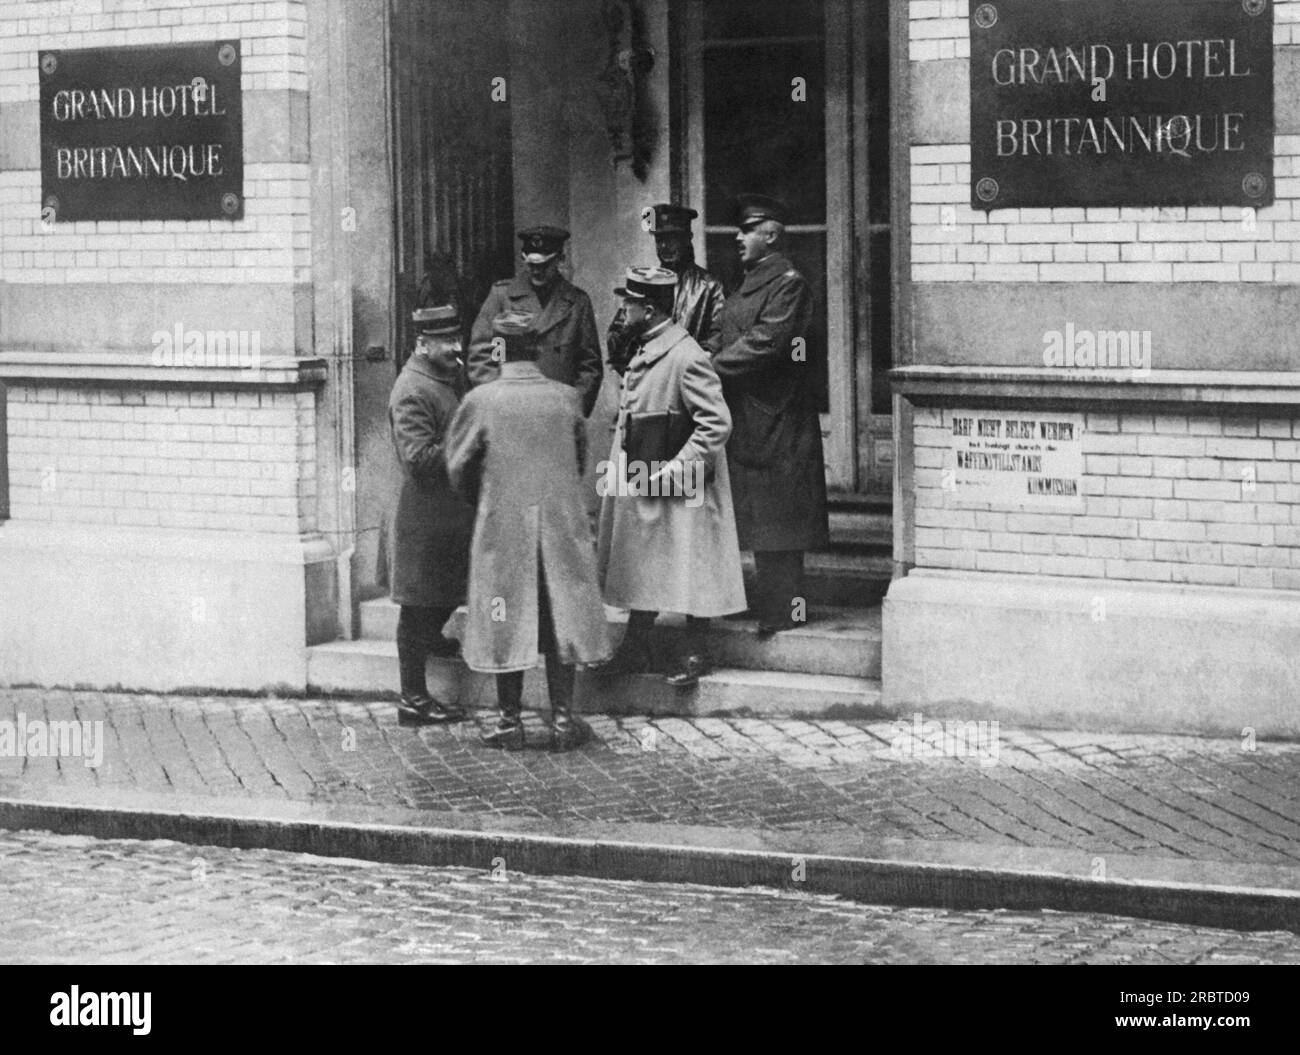 Spa, Belgium:  January 2, 1919 The British, American, French and Italian delegates leaving the Grand Hotel Britannique where the terms of the Armistice were discussed in Spa. Stock Photo